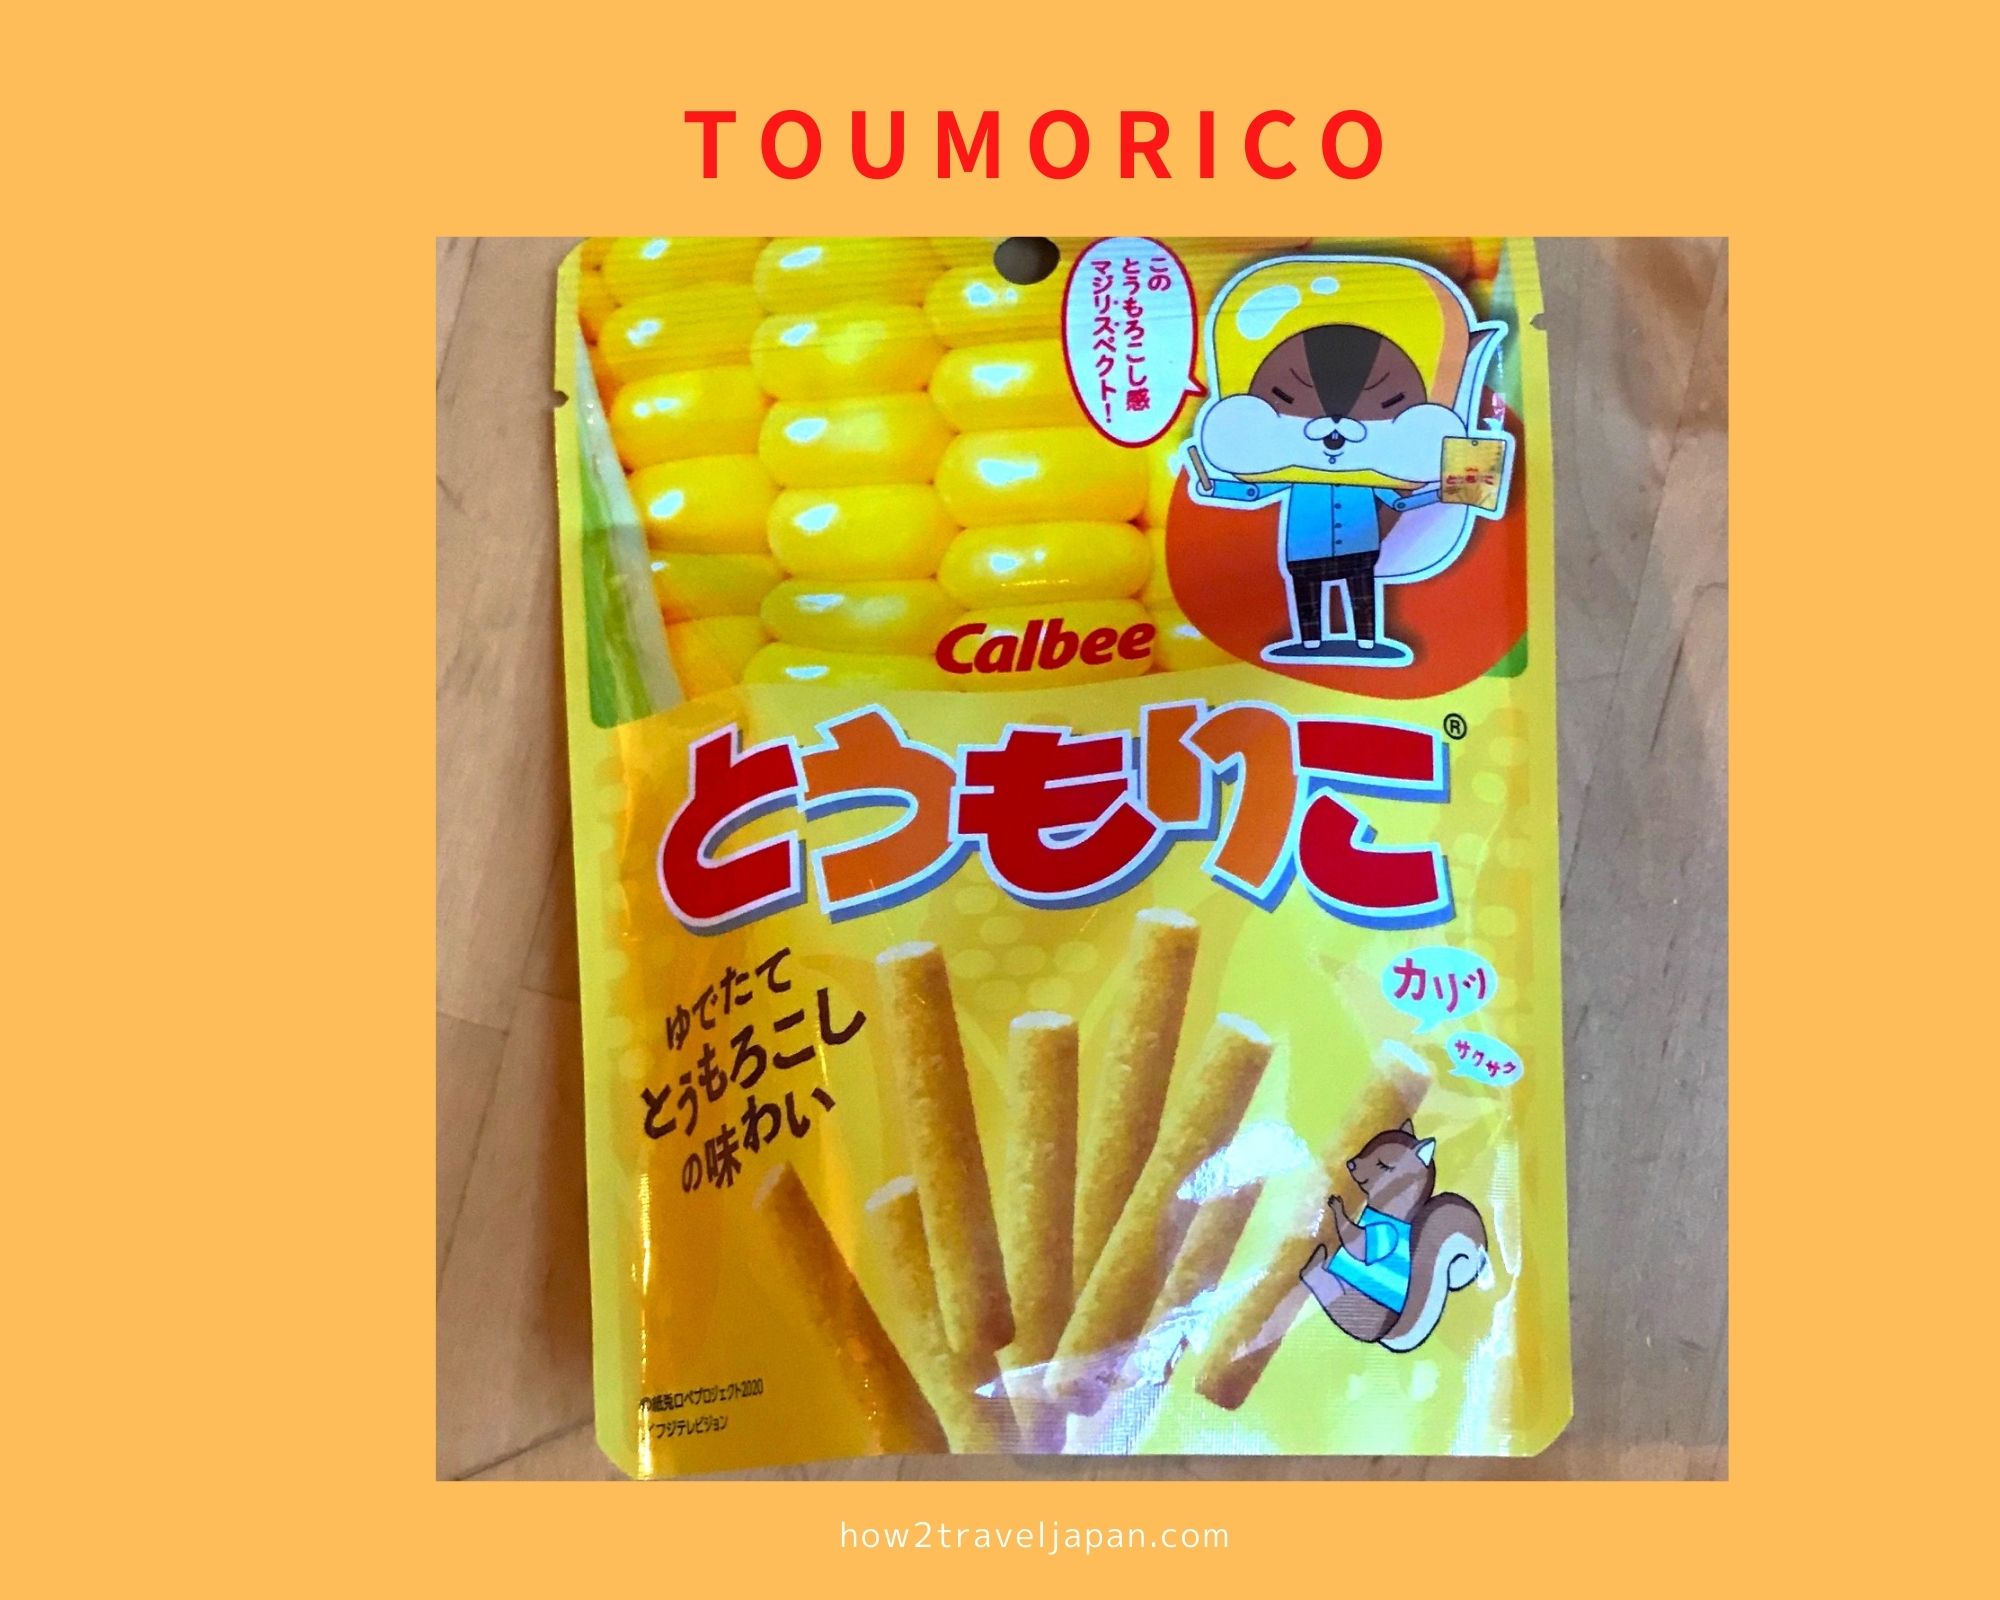 Read more about the article Toumorico, a corn snack from Calbee